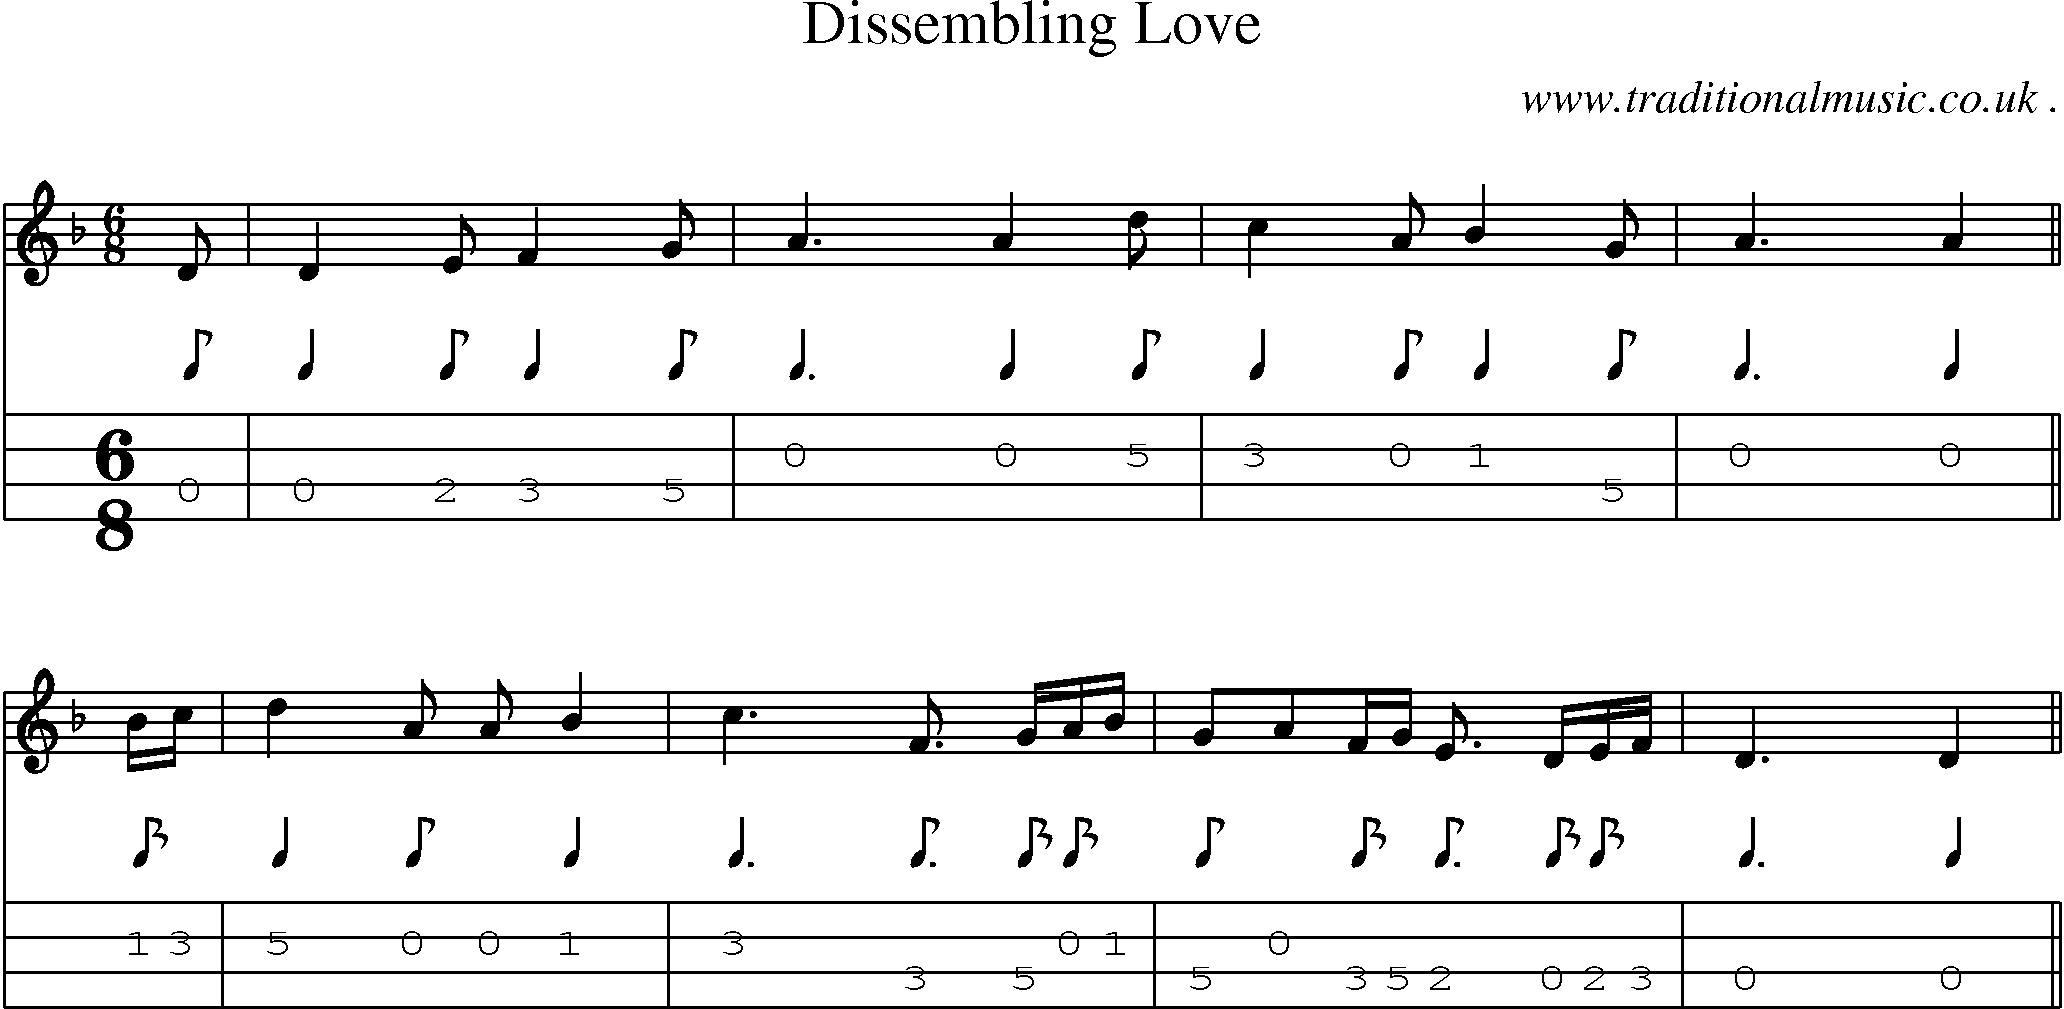 Sheet-music  score, Chords and Mandolin Tabs for Dissembling Love